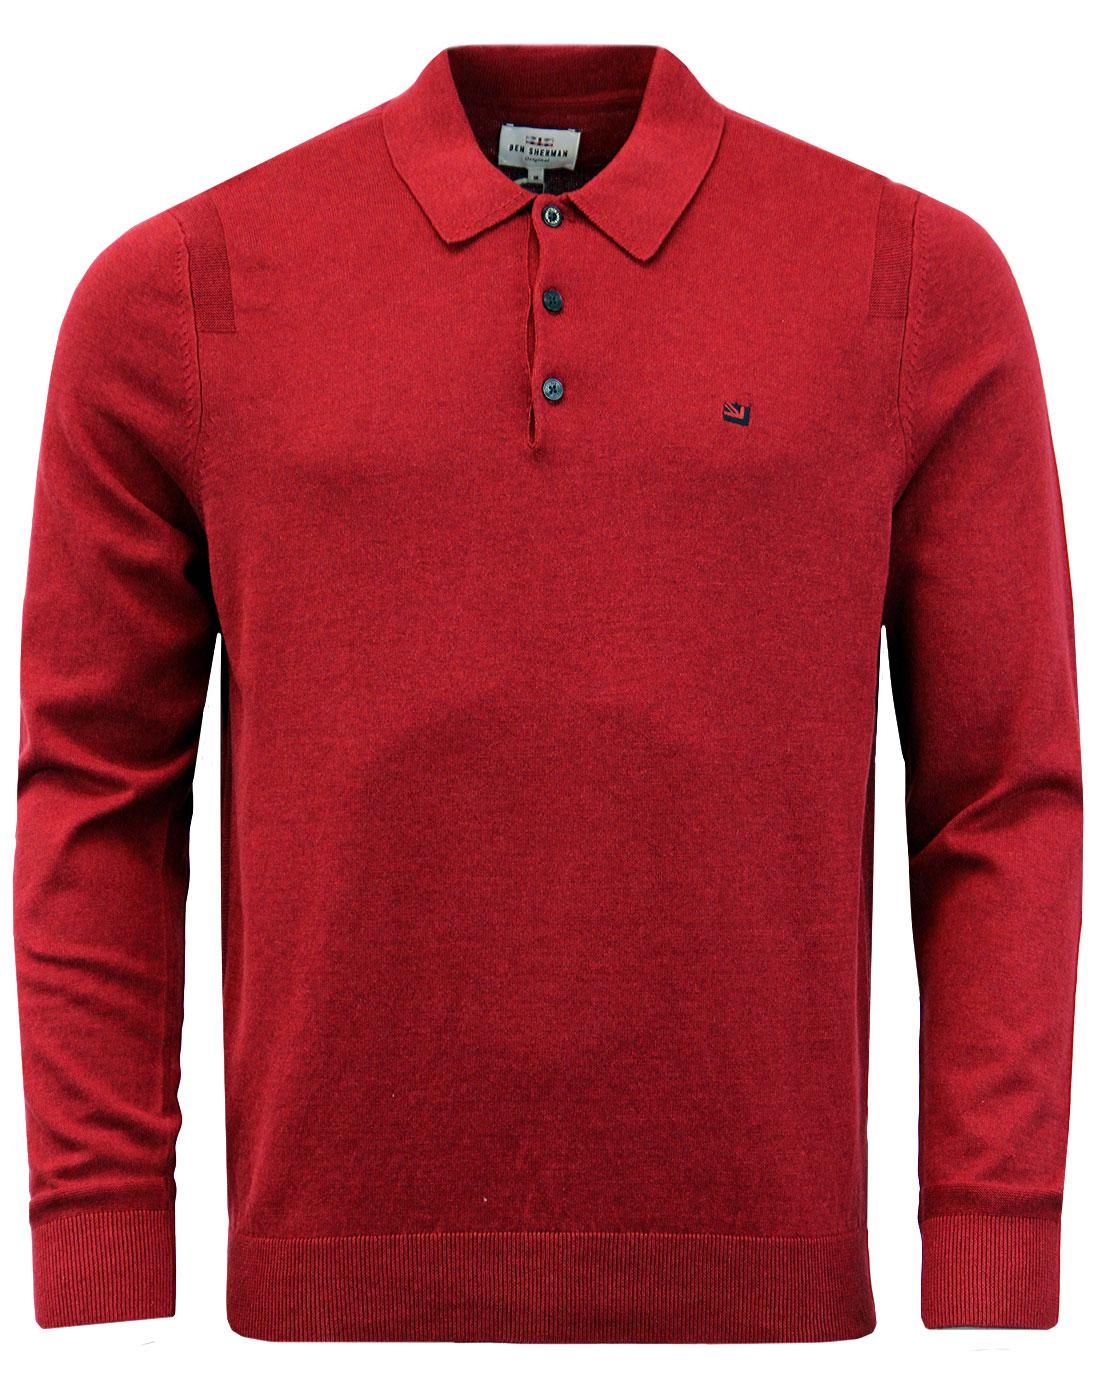 BEN SHERMAN Mod Long Sleeve Knitted Polo - Red